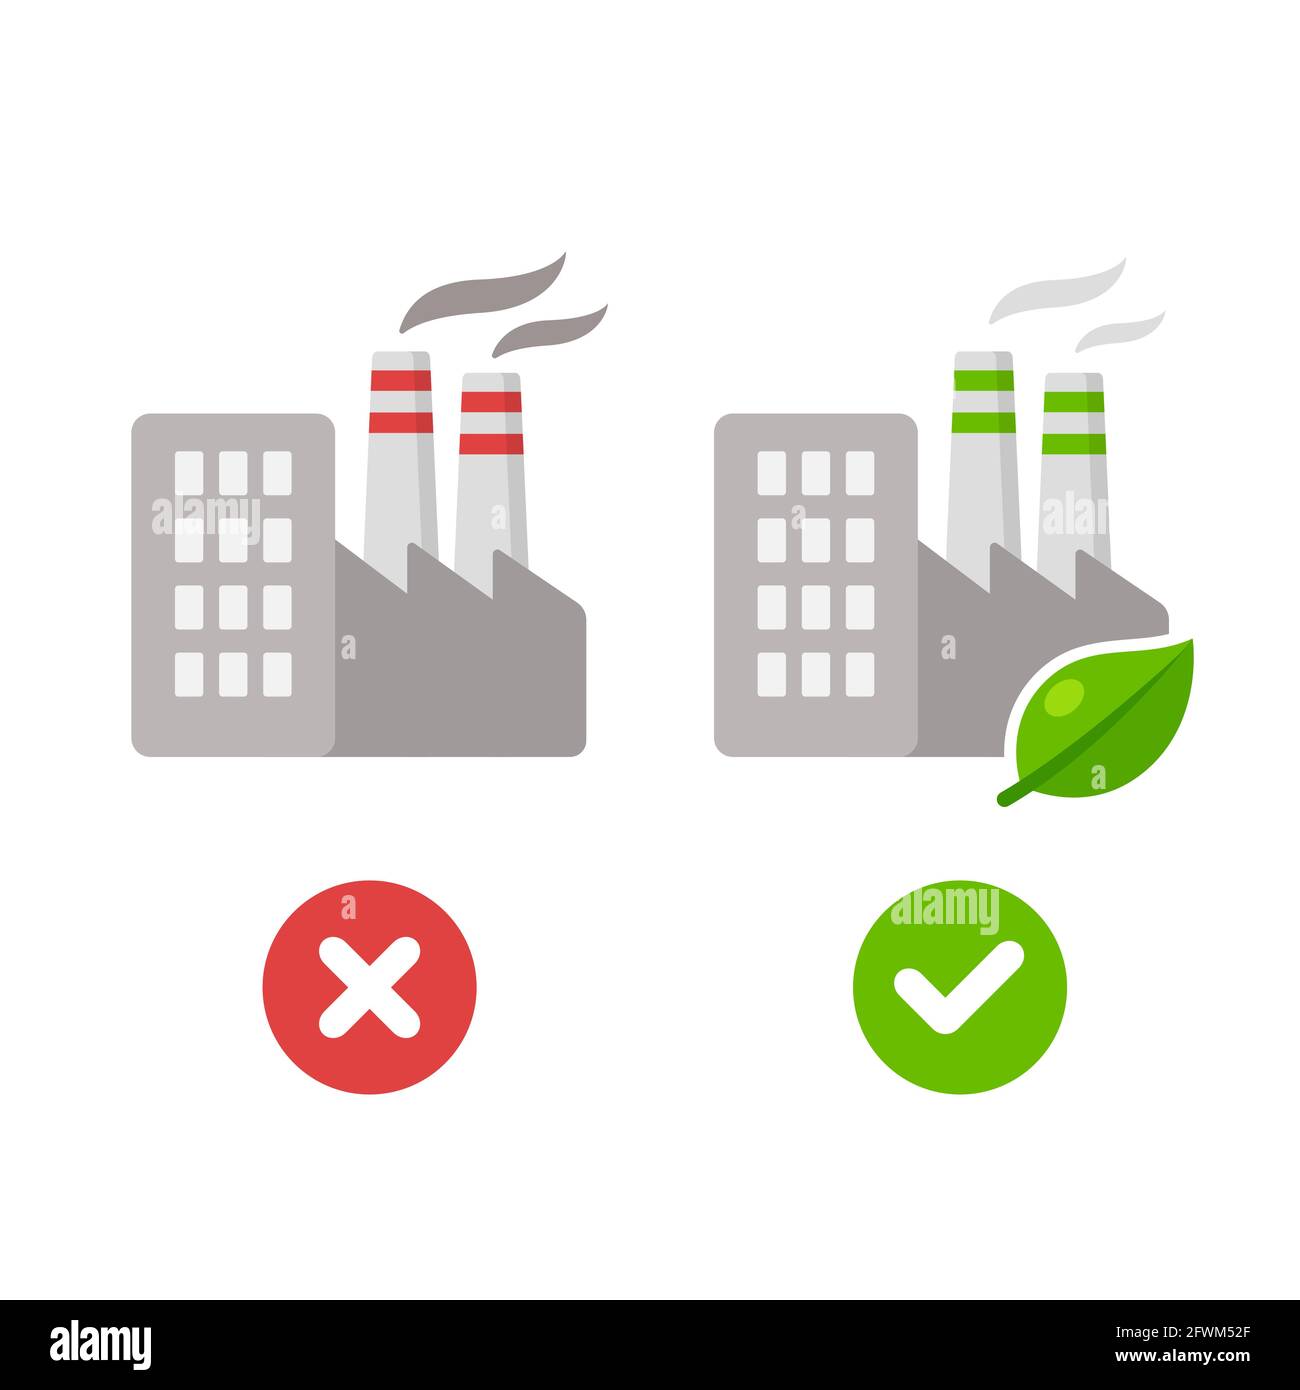 Traditional factory with smoke pollution and modern environmentally friendly plant with green leaf. Ecology and industry vector illustration. Stock Vector